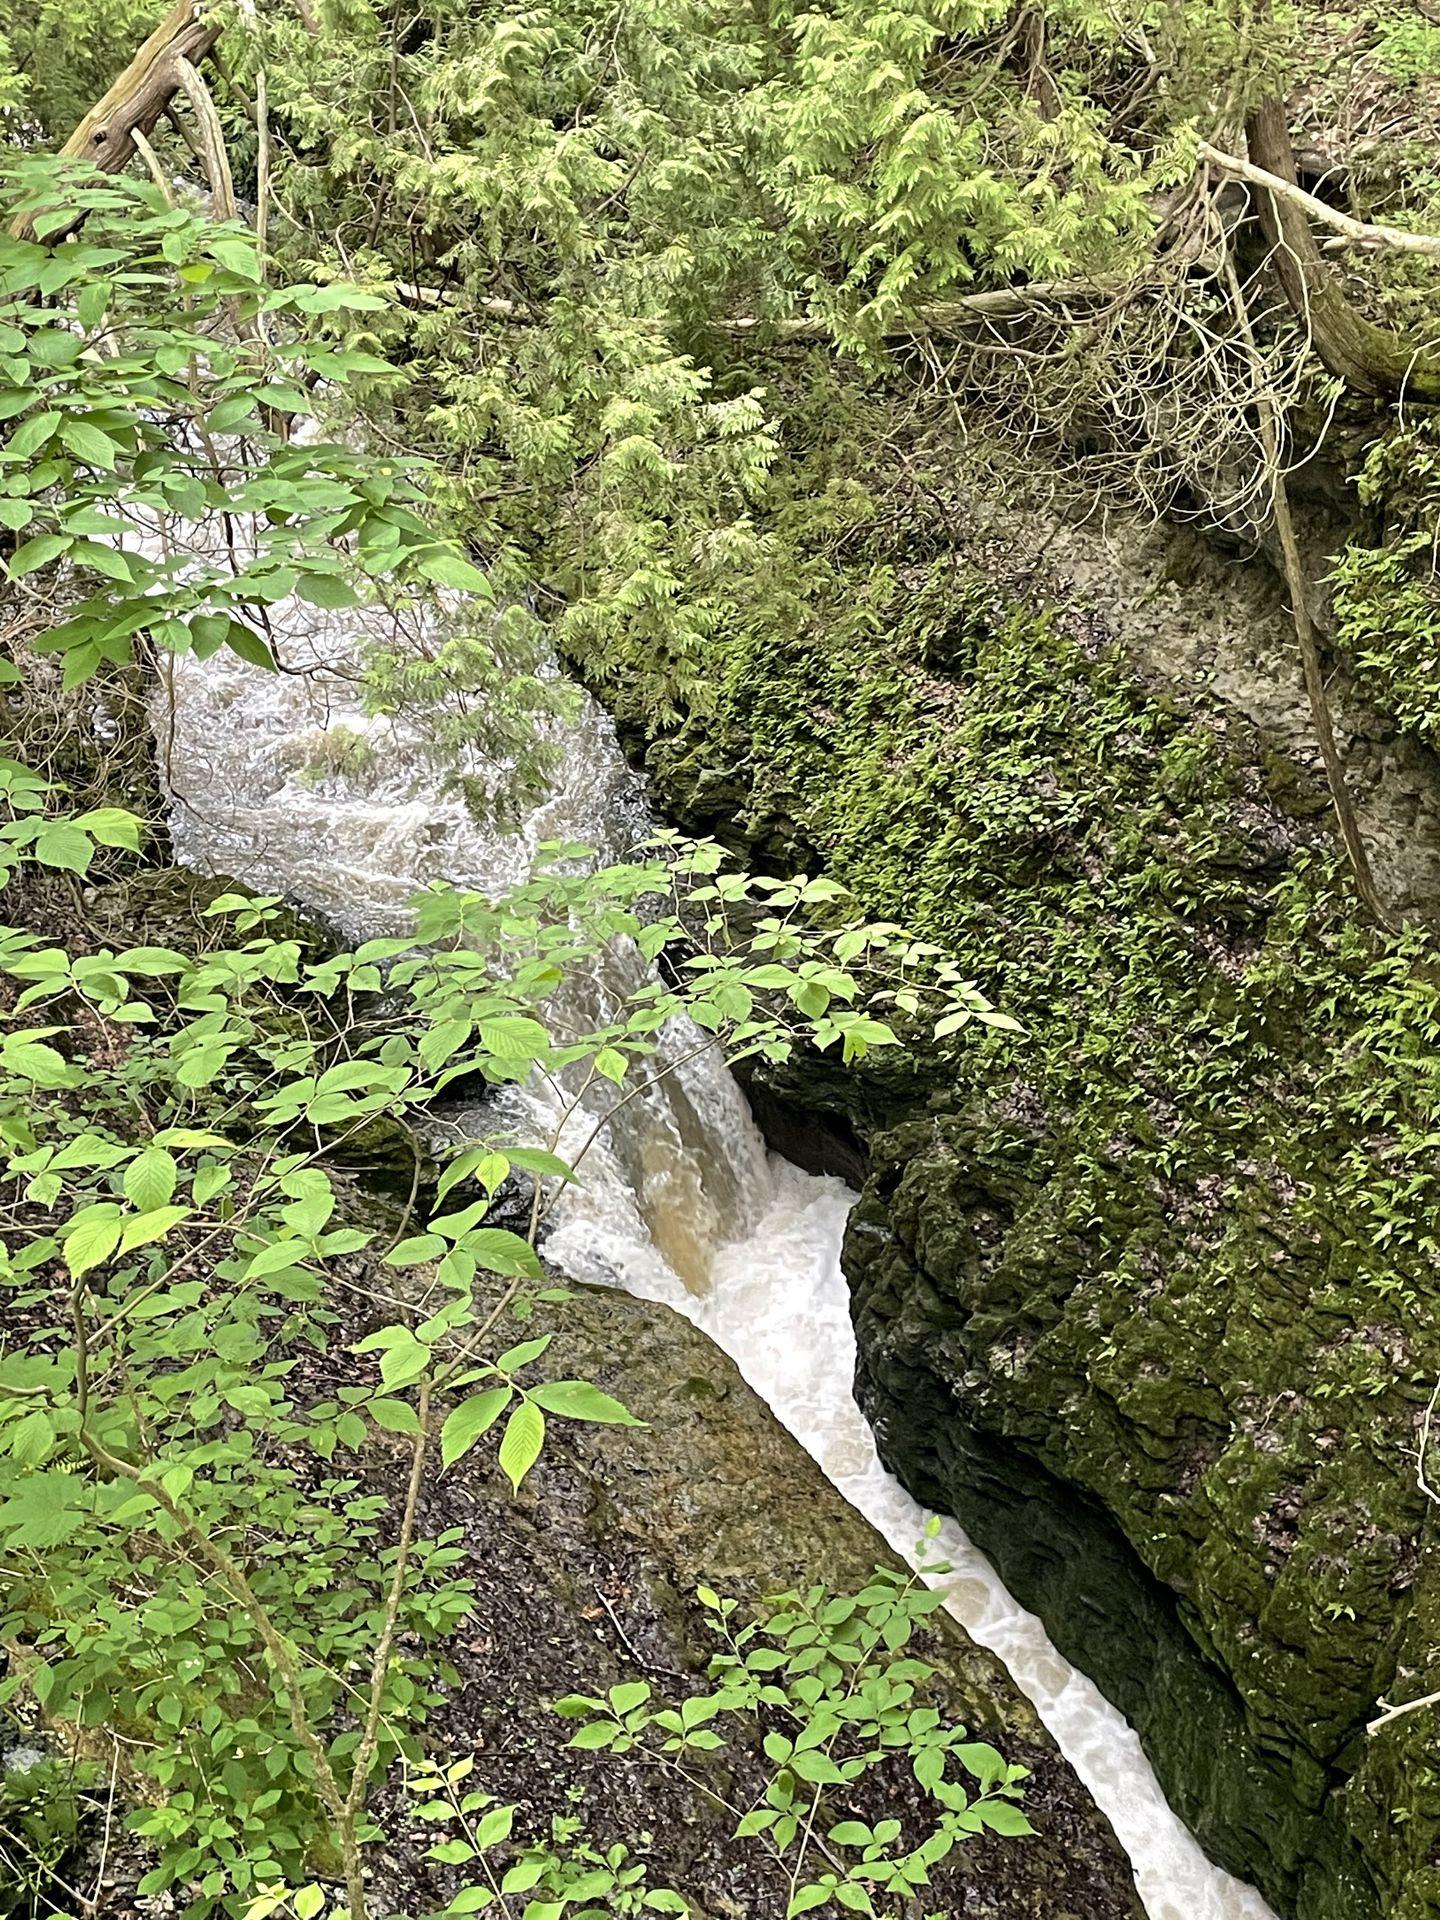 Water running through the gorge in Clifton Gorge State Nature Preserve